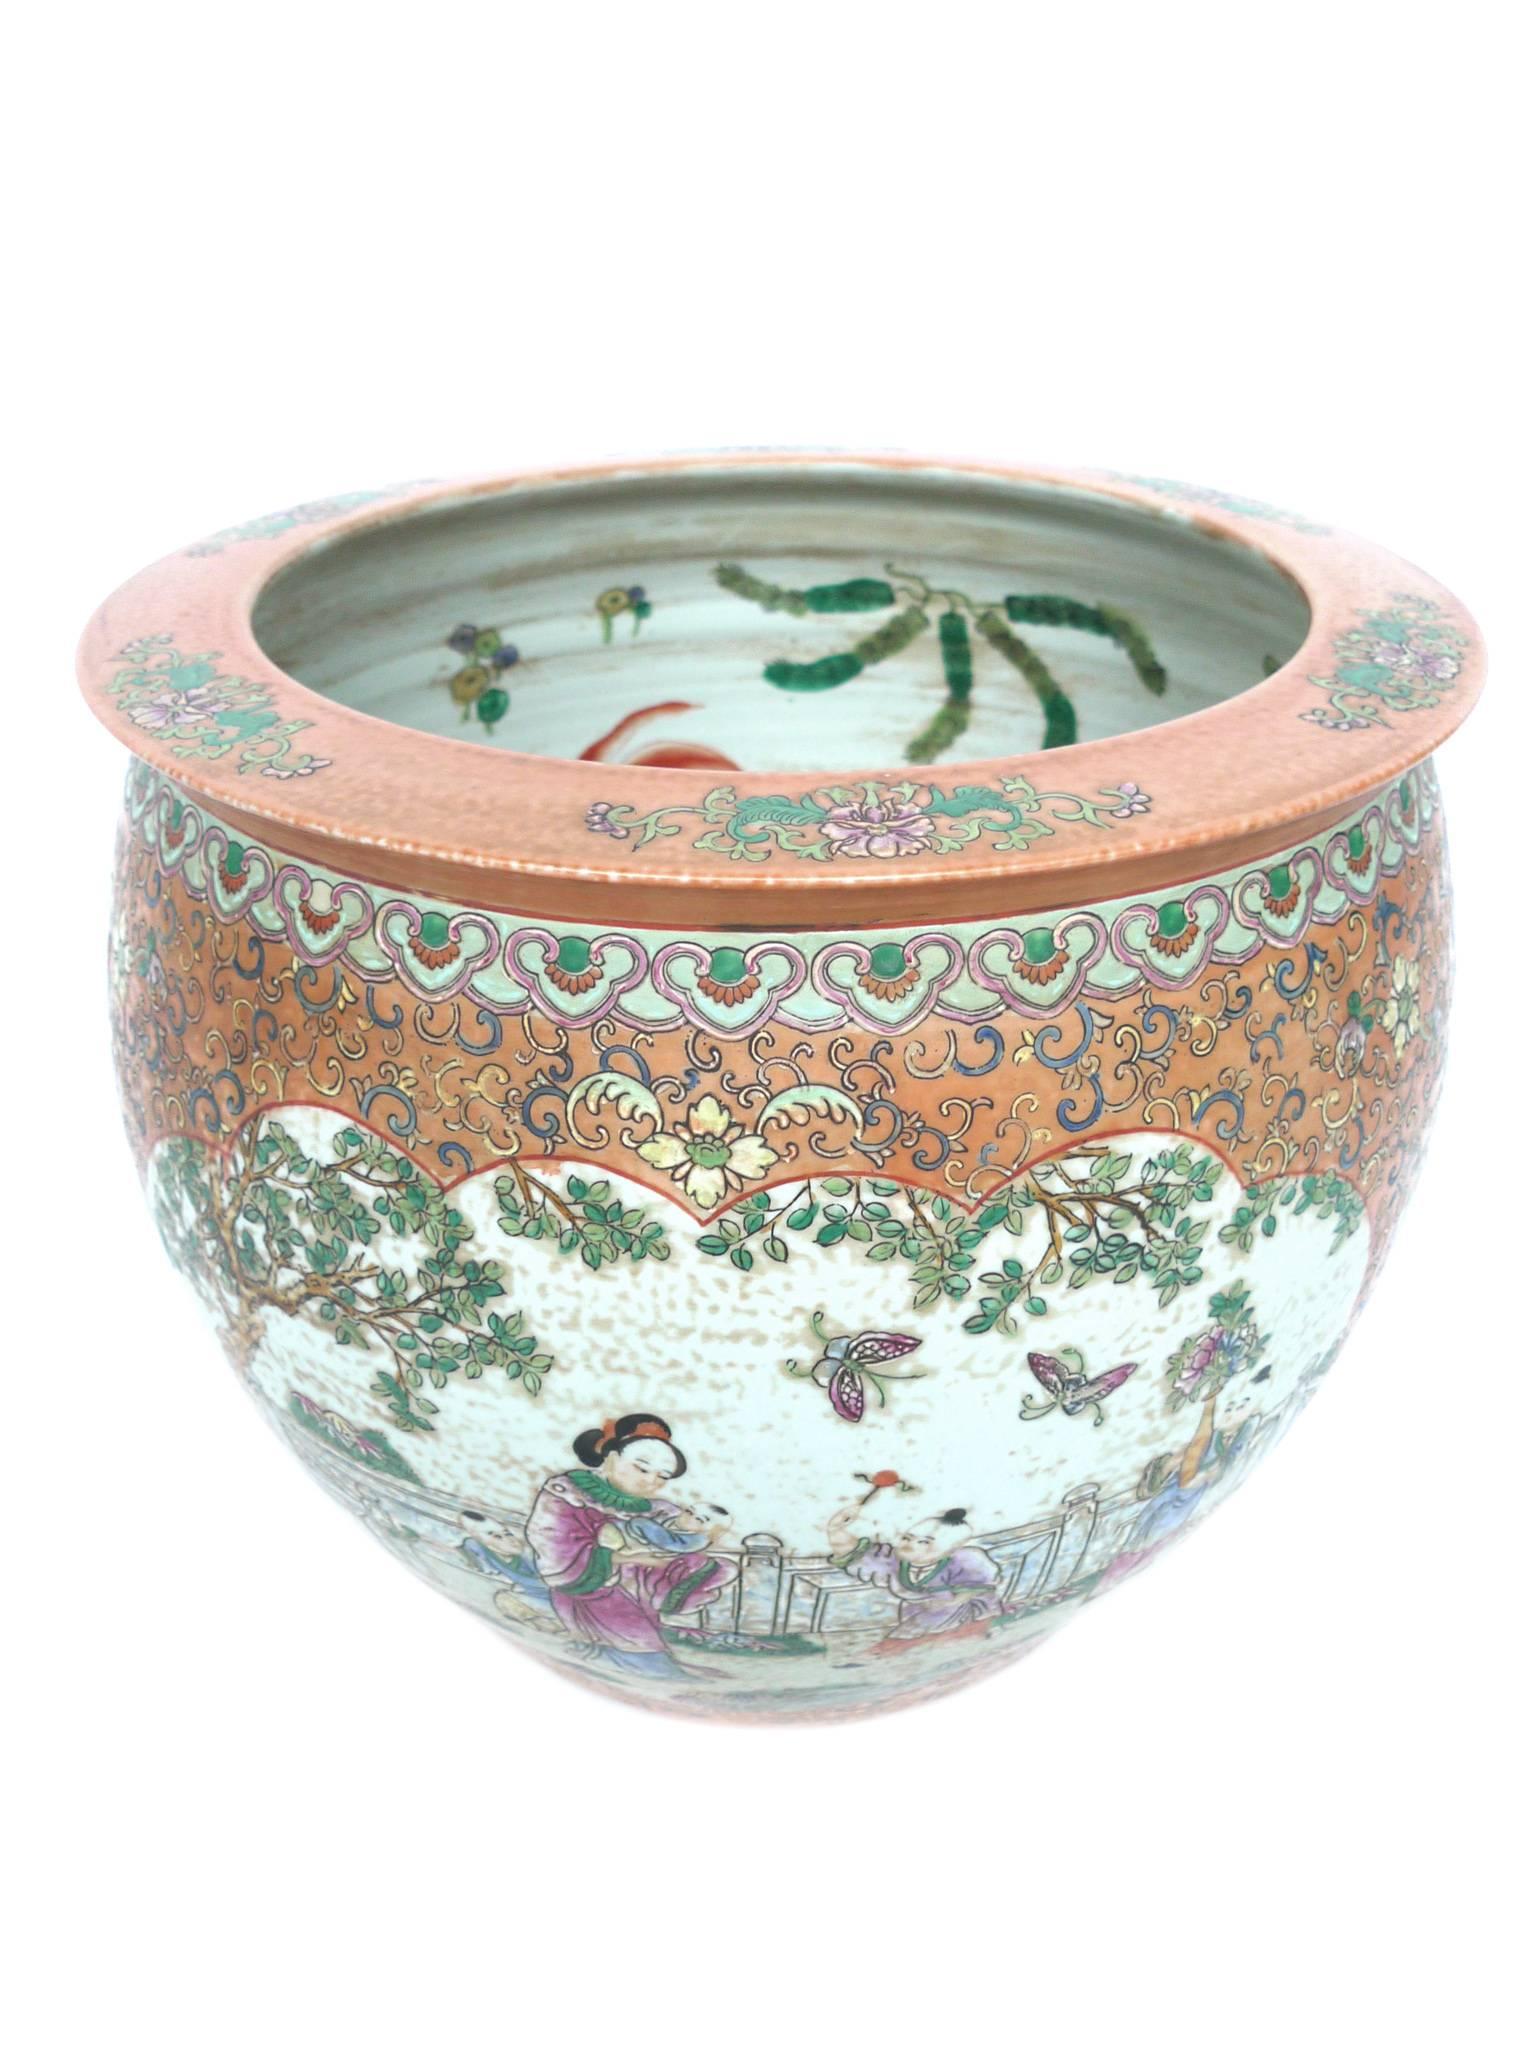 This peach-colored ceramic fishbowl is beautifully hand-painted. The exterior design depicts pastoral vignettes of figures in a garden, surrounded by a floral pattern, while the interior's design is of goldfish and plant flora. This design is